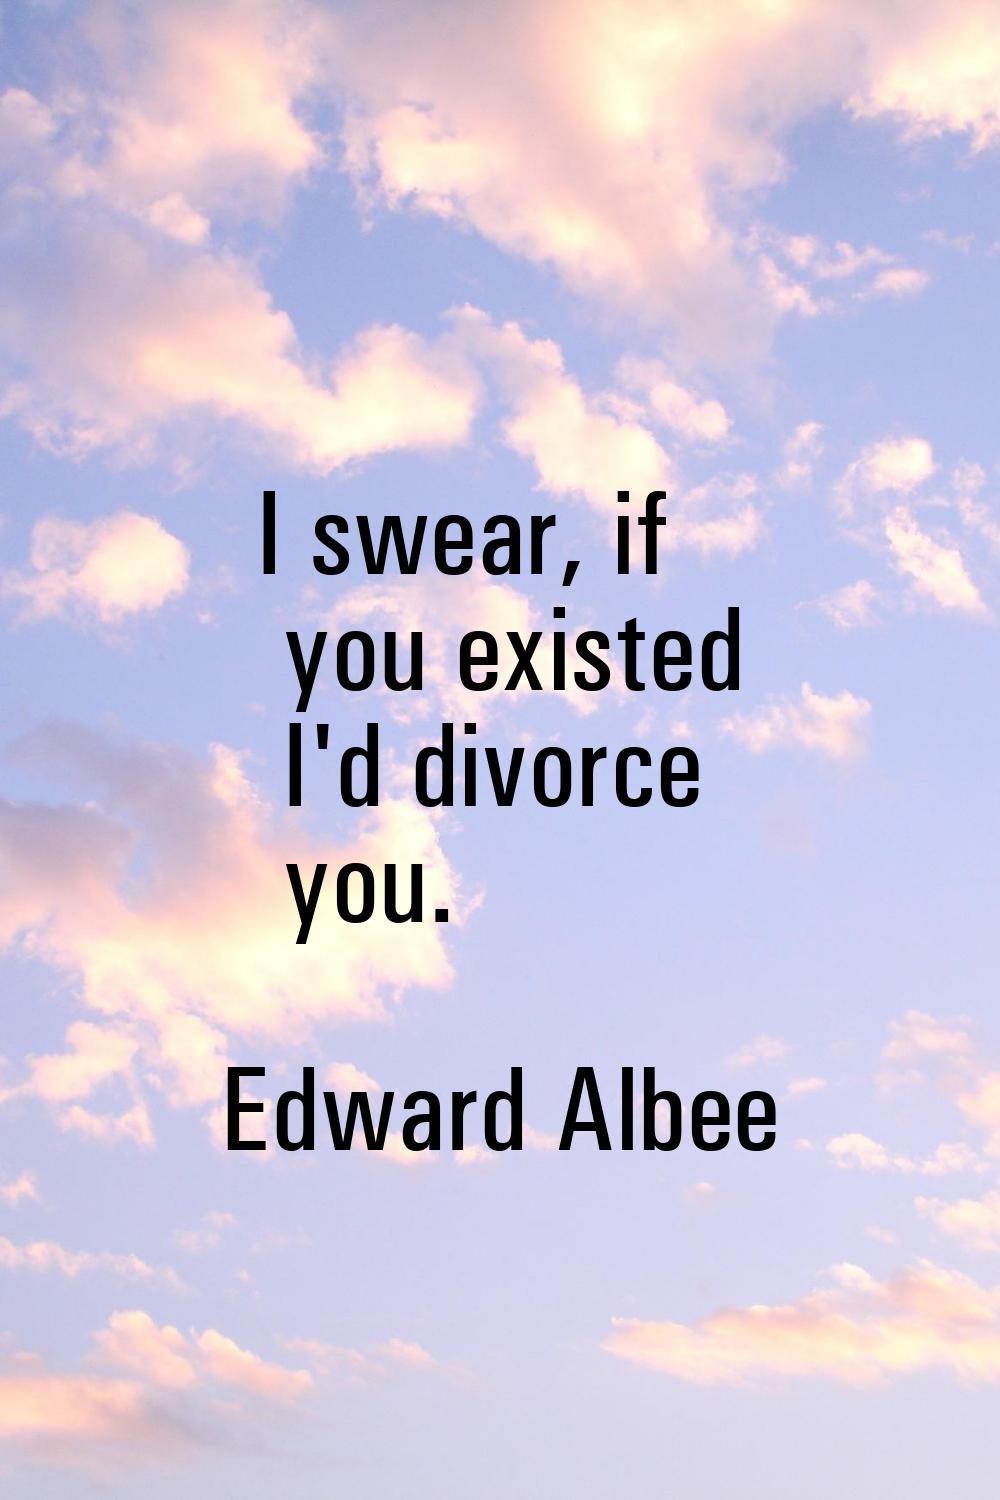 I swear, if you existed I'd divorce you.